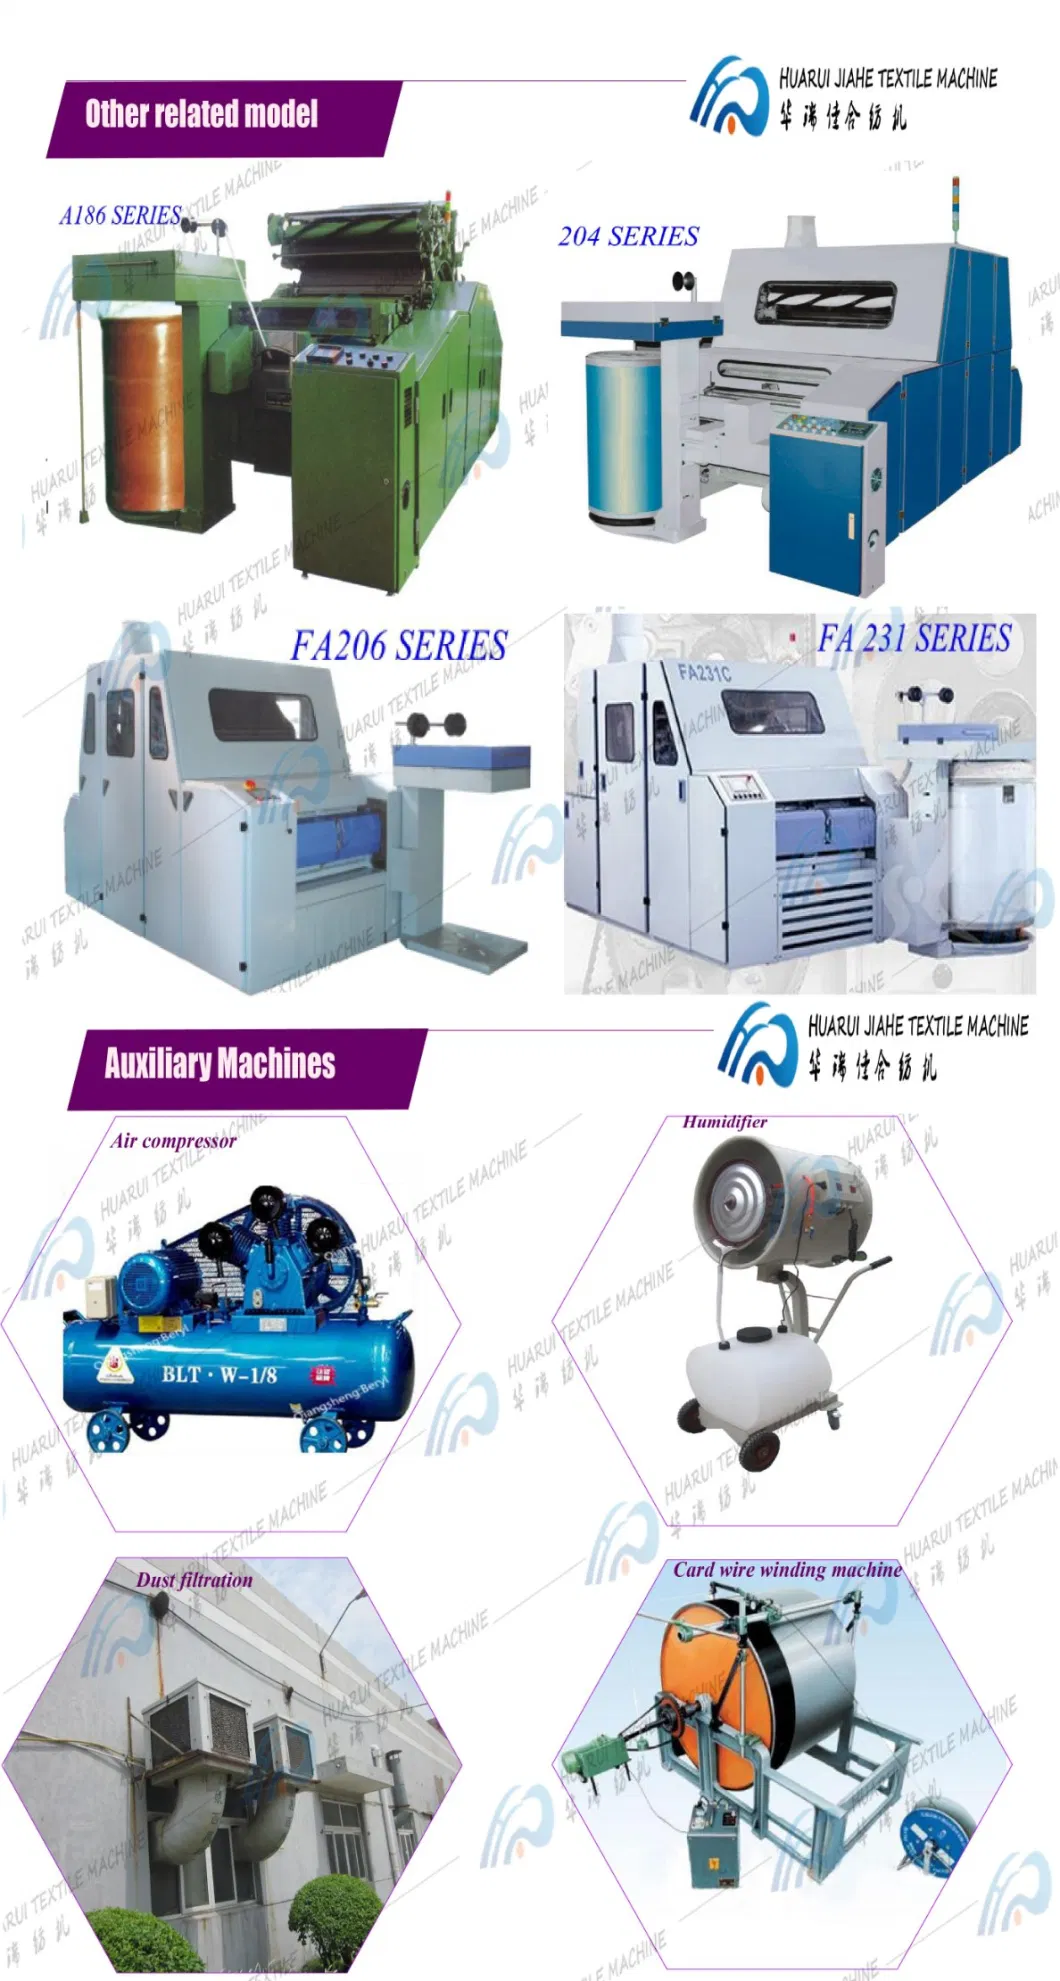 Automatic Powder Feeding System and Automatic Feeding System Solution for Dyeing Production Line